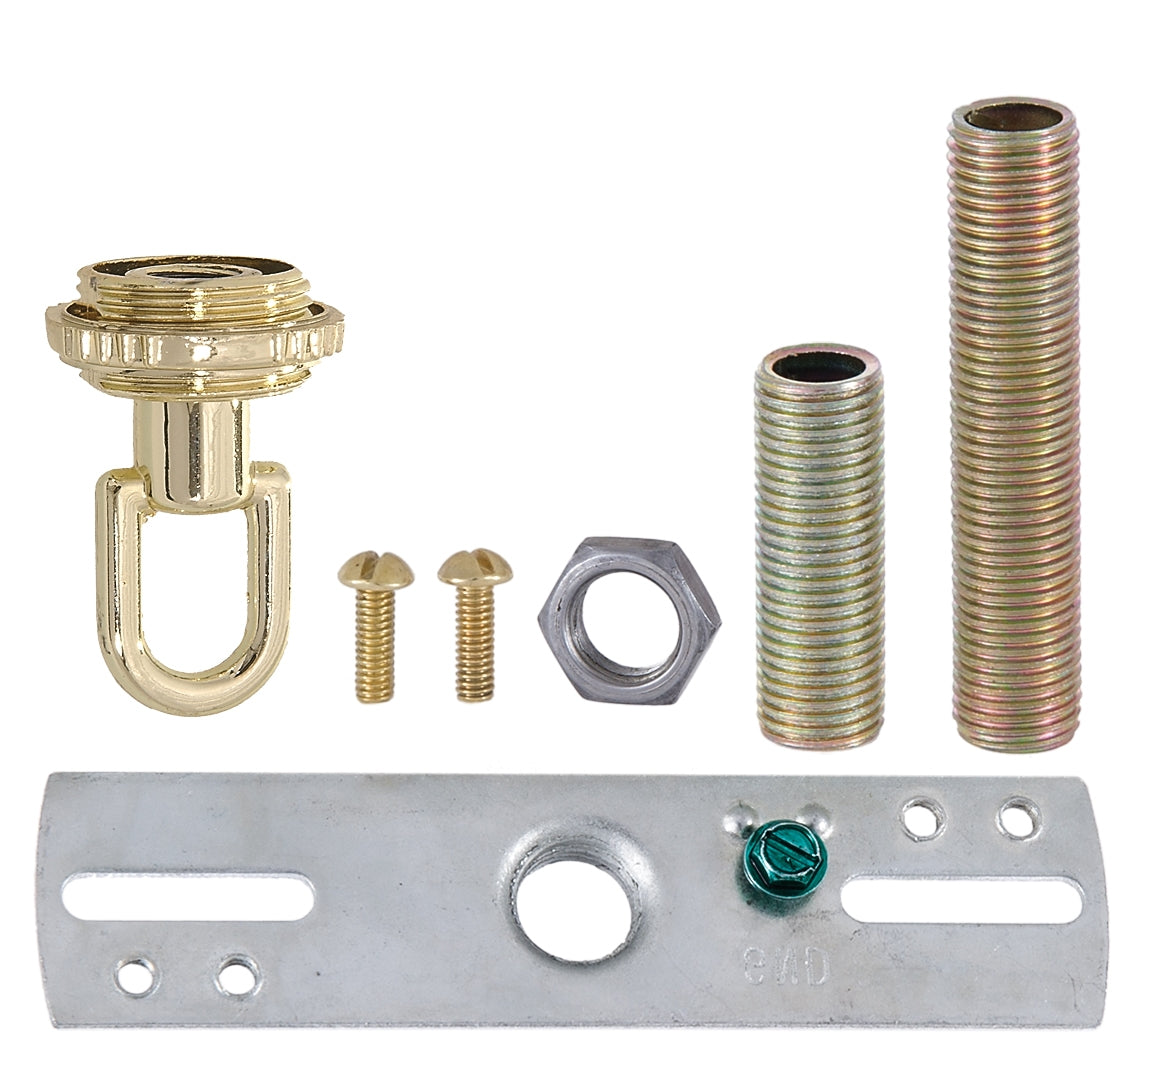 5 Inch Diameter Brass Plated Steel Canopy with Hardware Kit and Screw Collar Loop